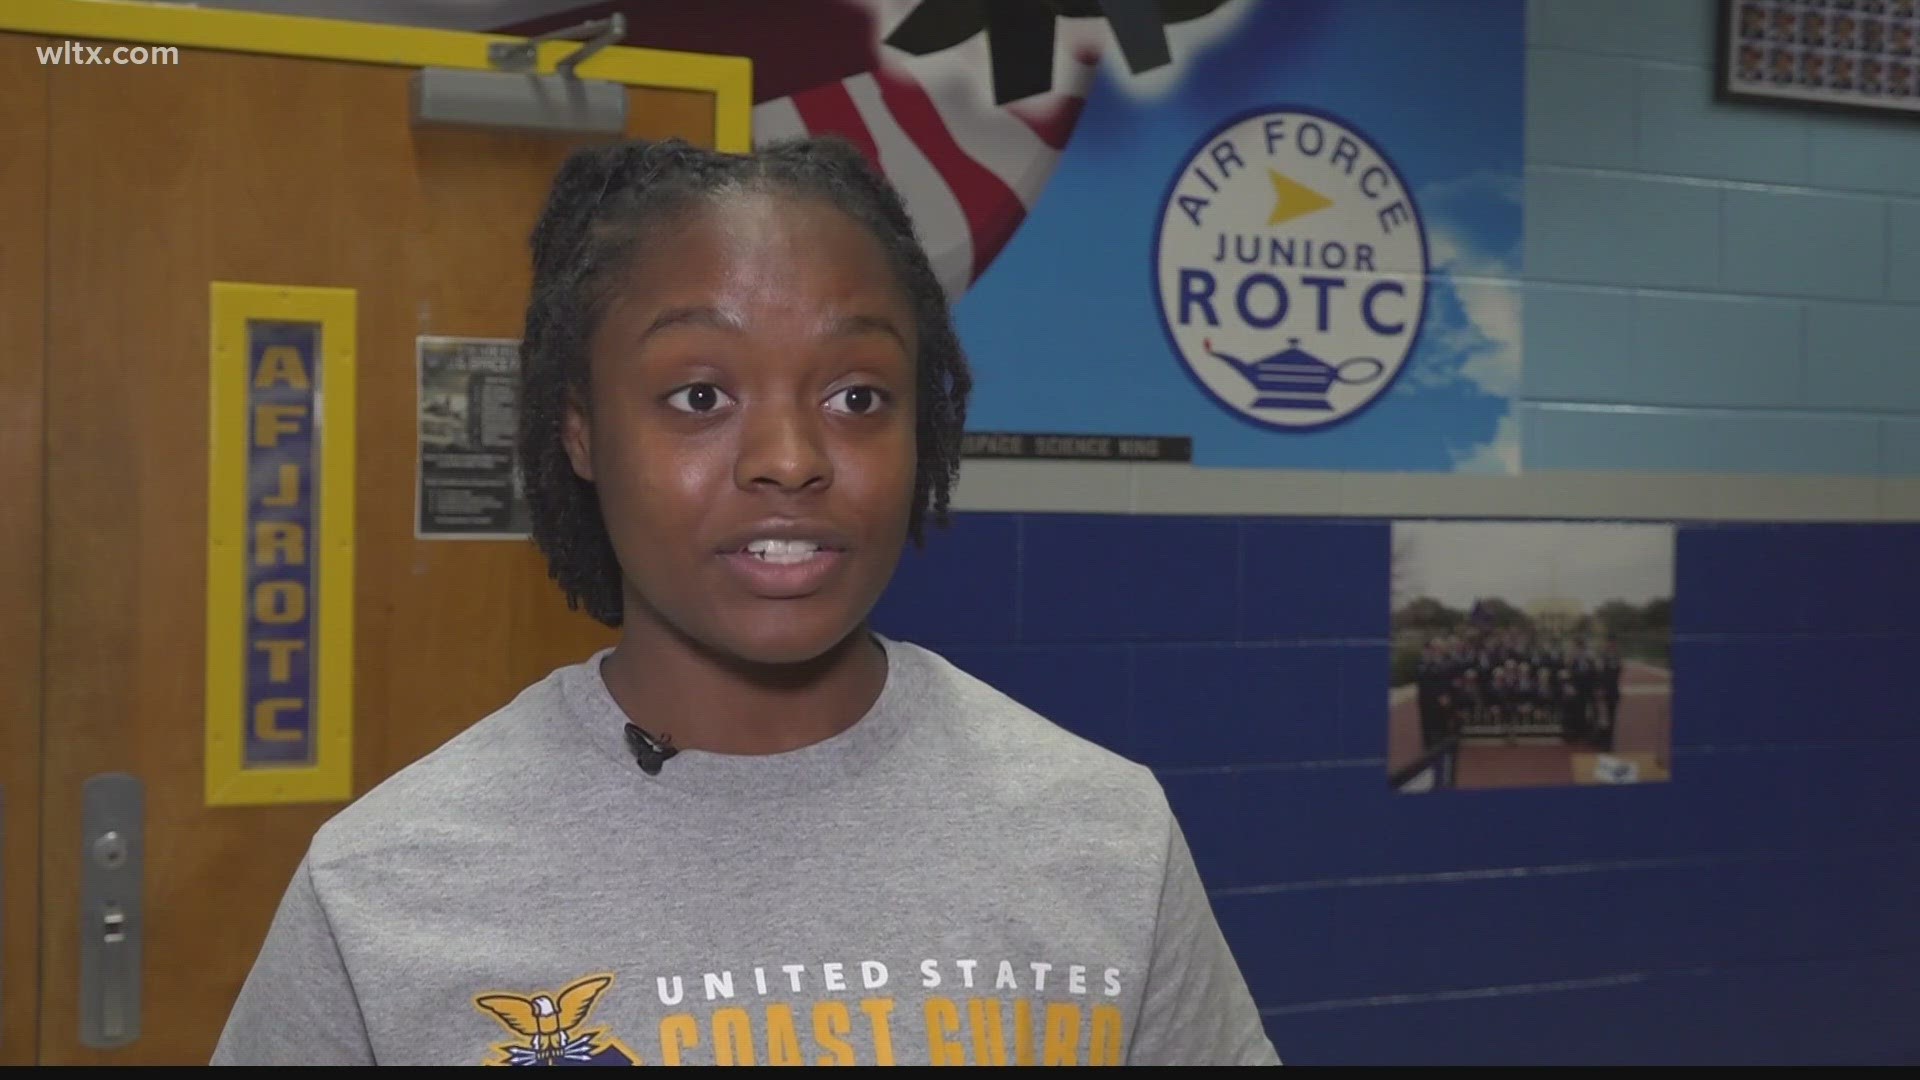 Eriyonna Walcott is a senior at Sumter High School. According to the Coast Guard Academy, only one South Carolinan has been accepted so far this year.